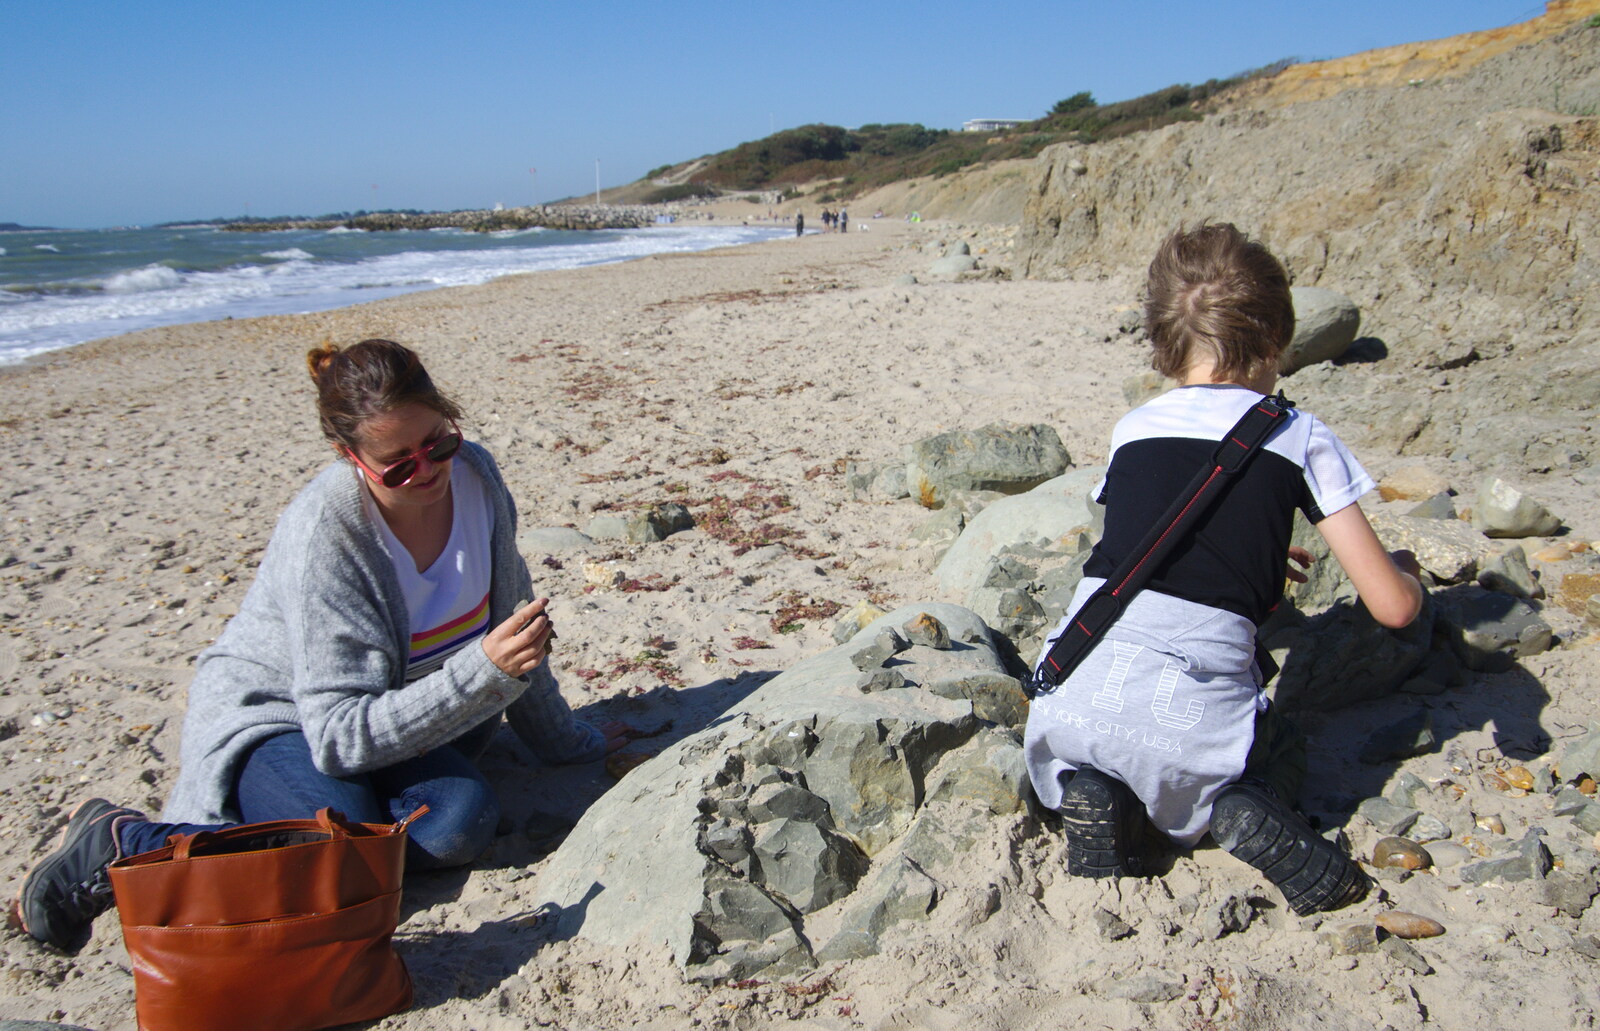 Isobel and Fred look for fossils from A Trip to the South Coast, Highcliffe, Dorset - 20th September 2019